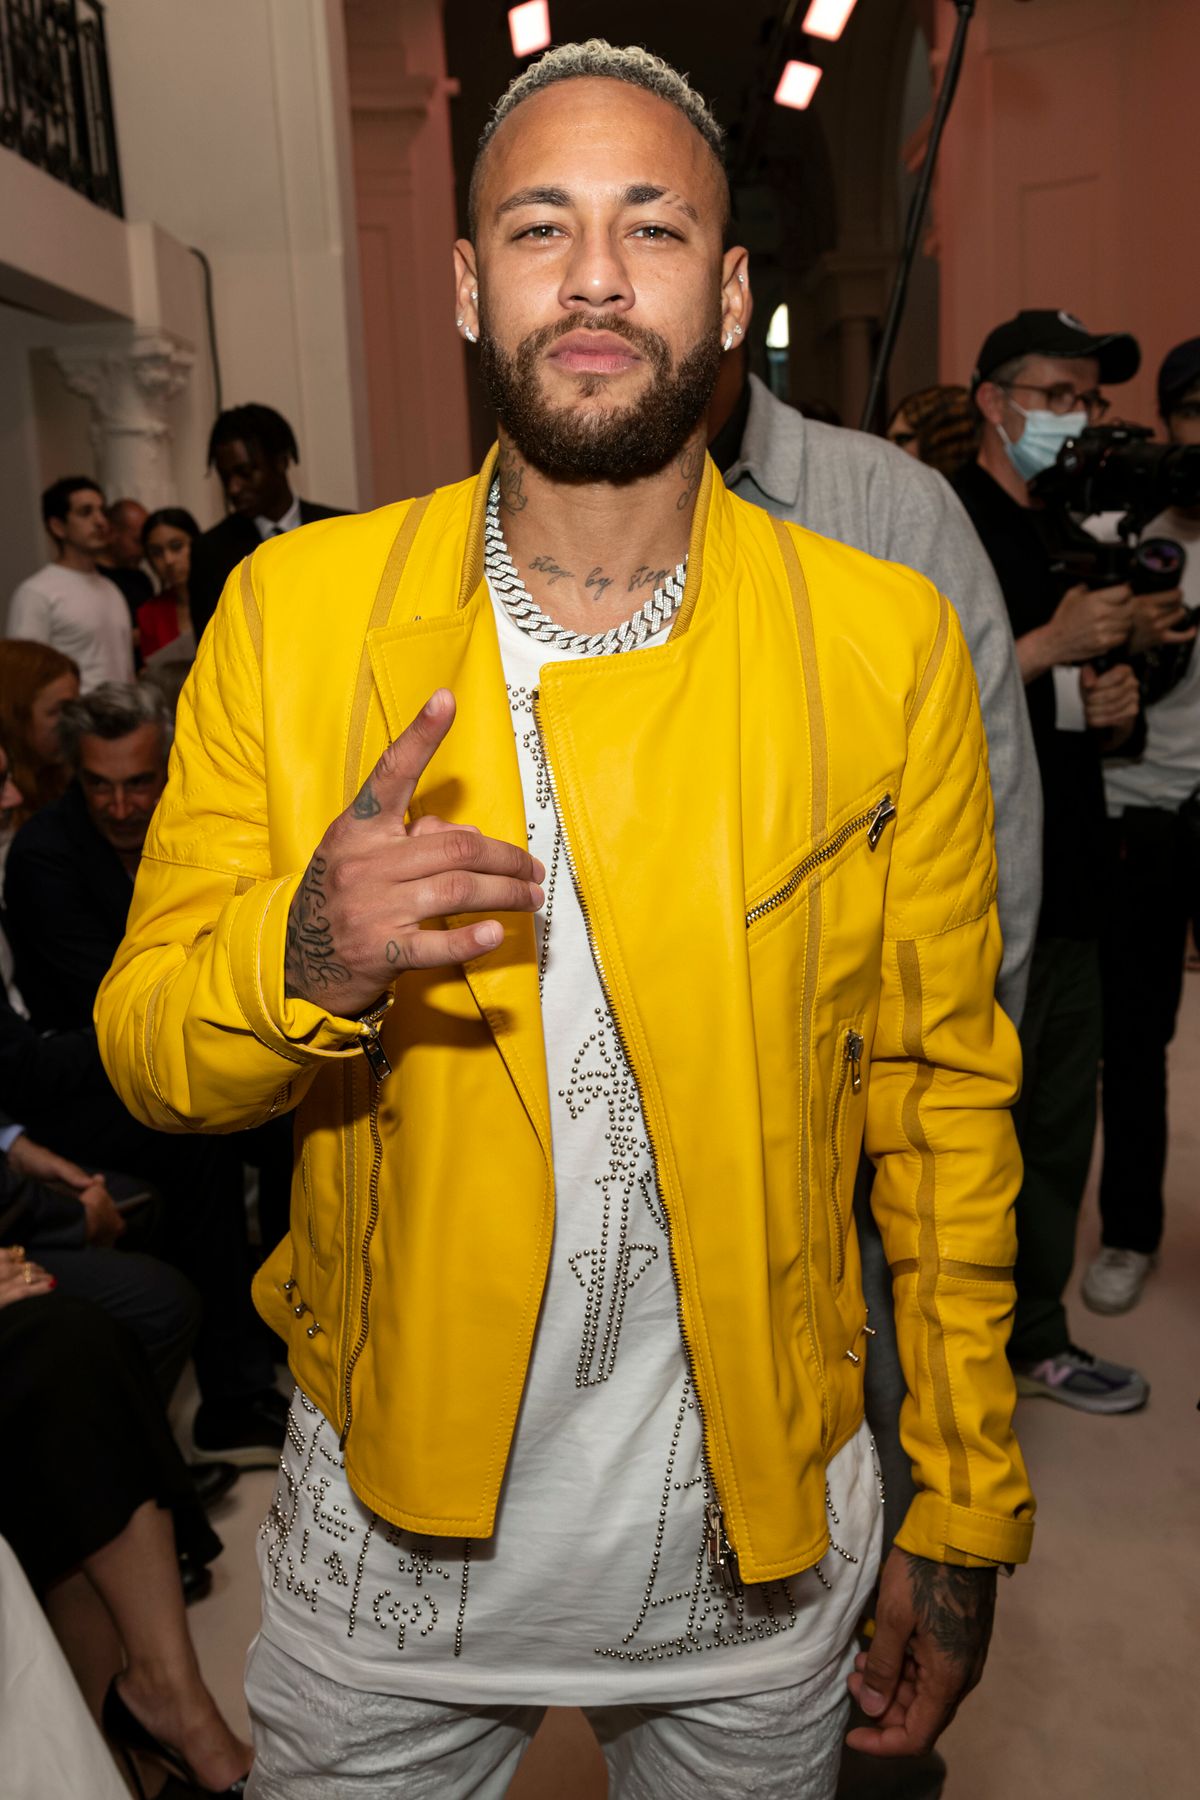 Neymar at JEAN PAUL GAULTIER Haute Couture AW22-23 runway during Haute Couture Autumn-Winter 2022/23 on July 2022 - Paris, France. 06/07/2022